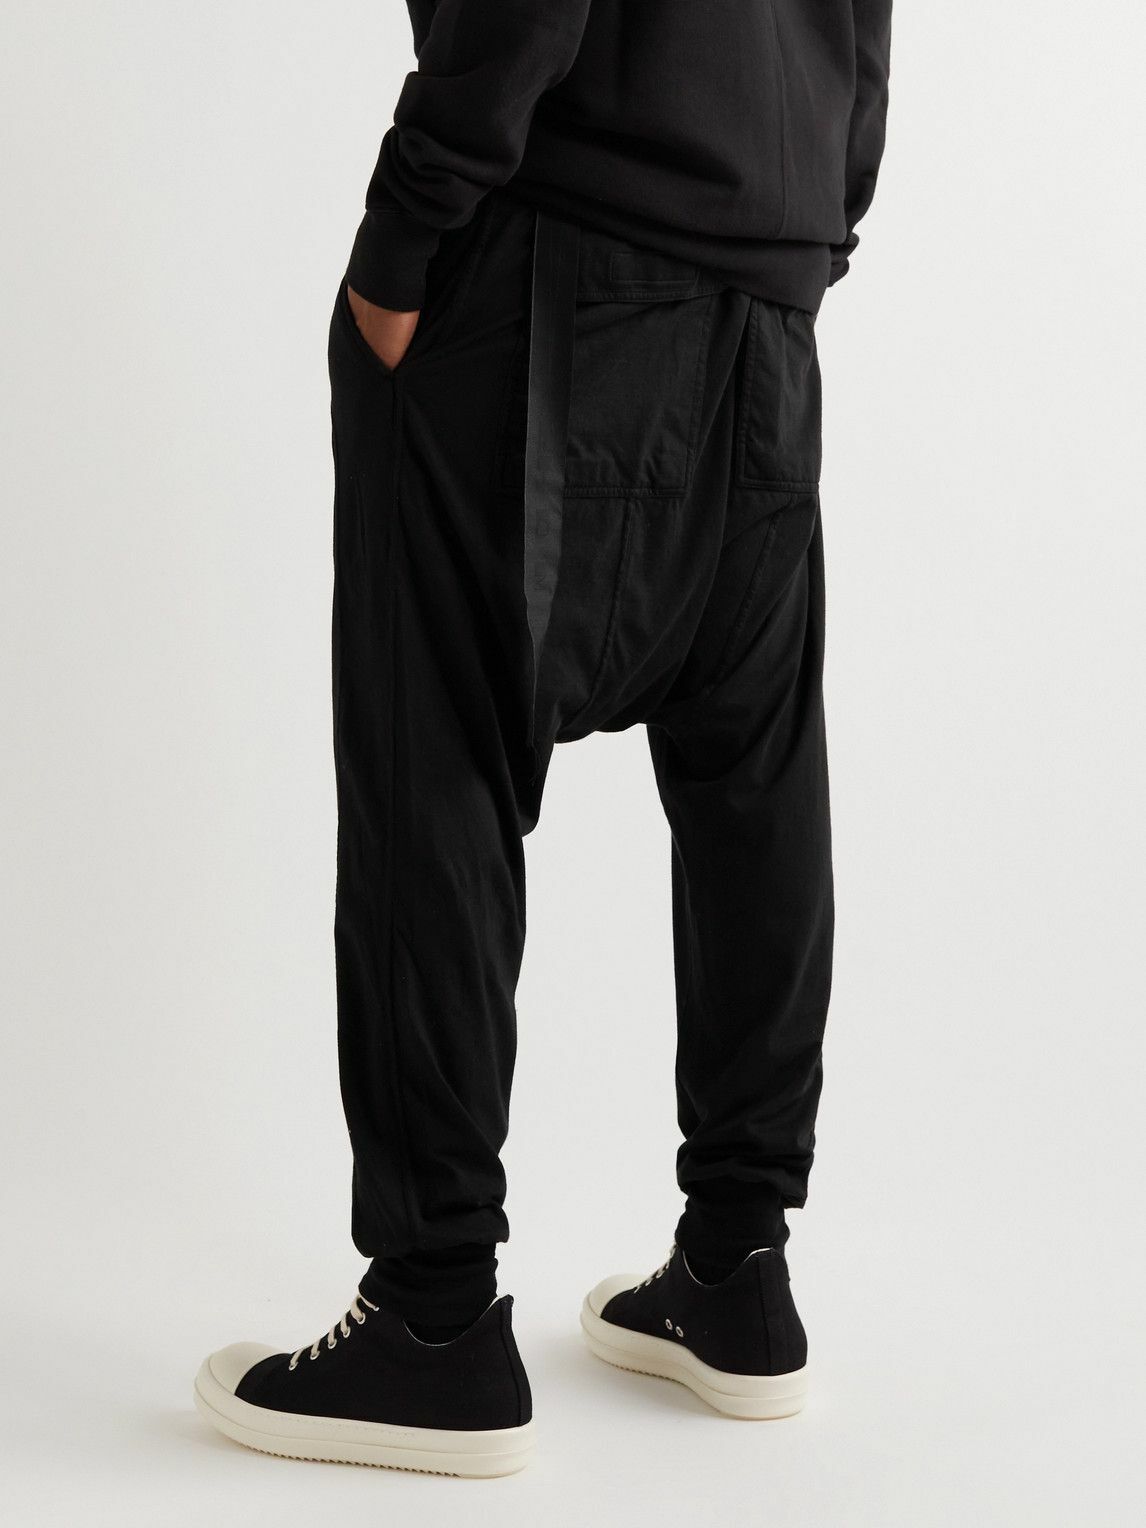 Rick Owens - Tapered Cotton-Jersey Drawstring Trousers - Black